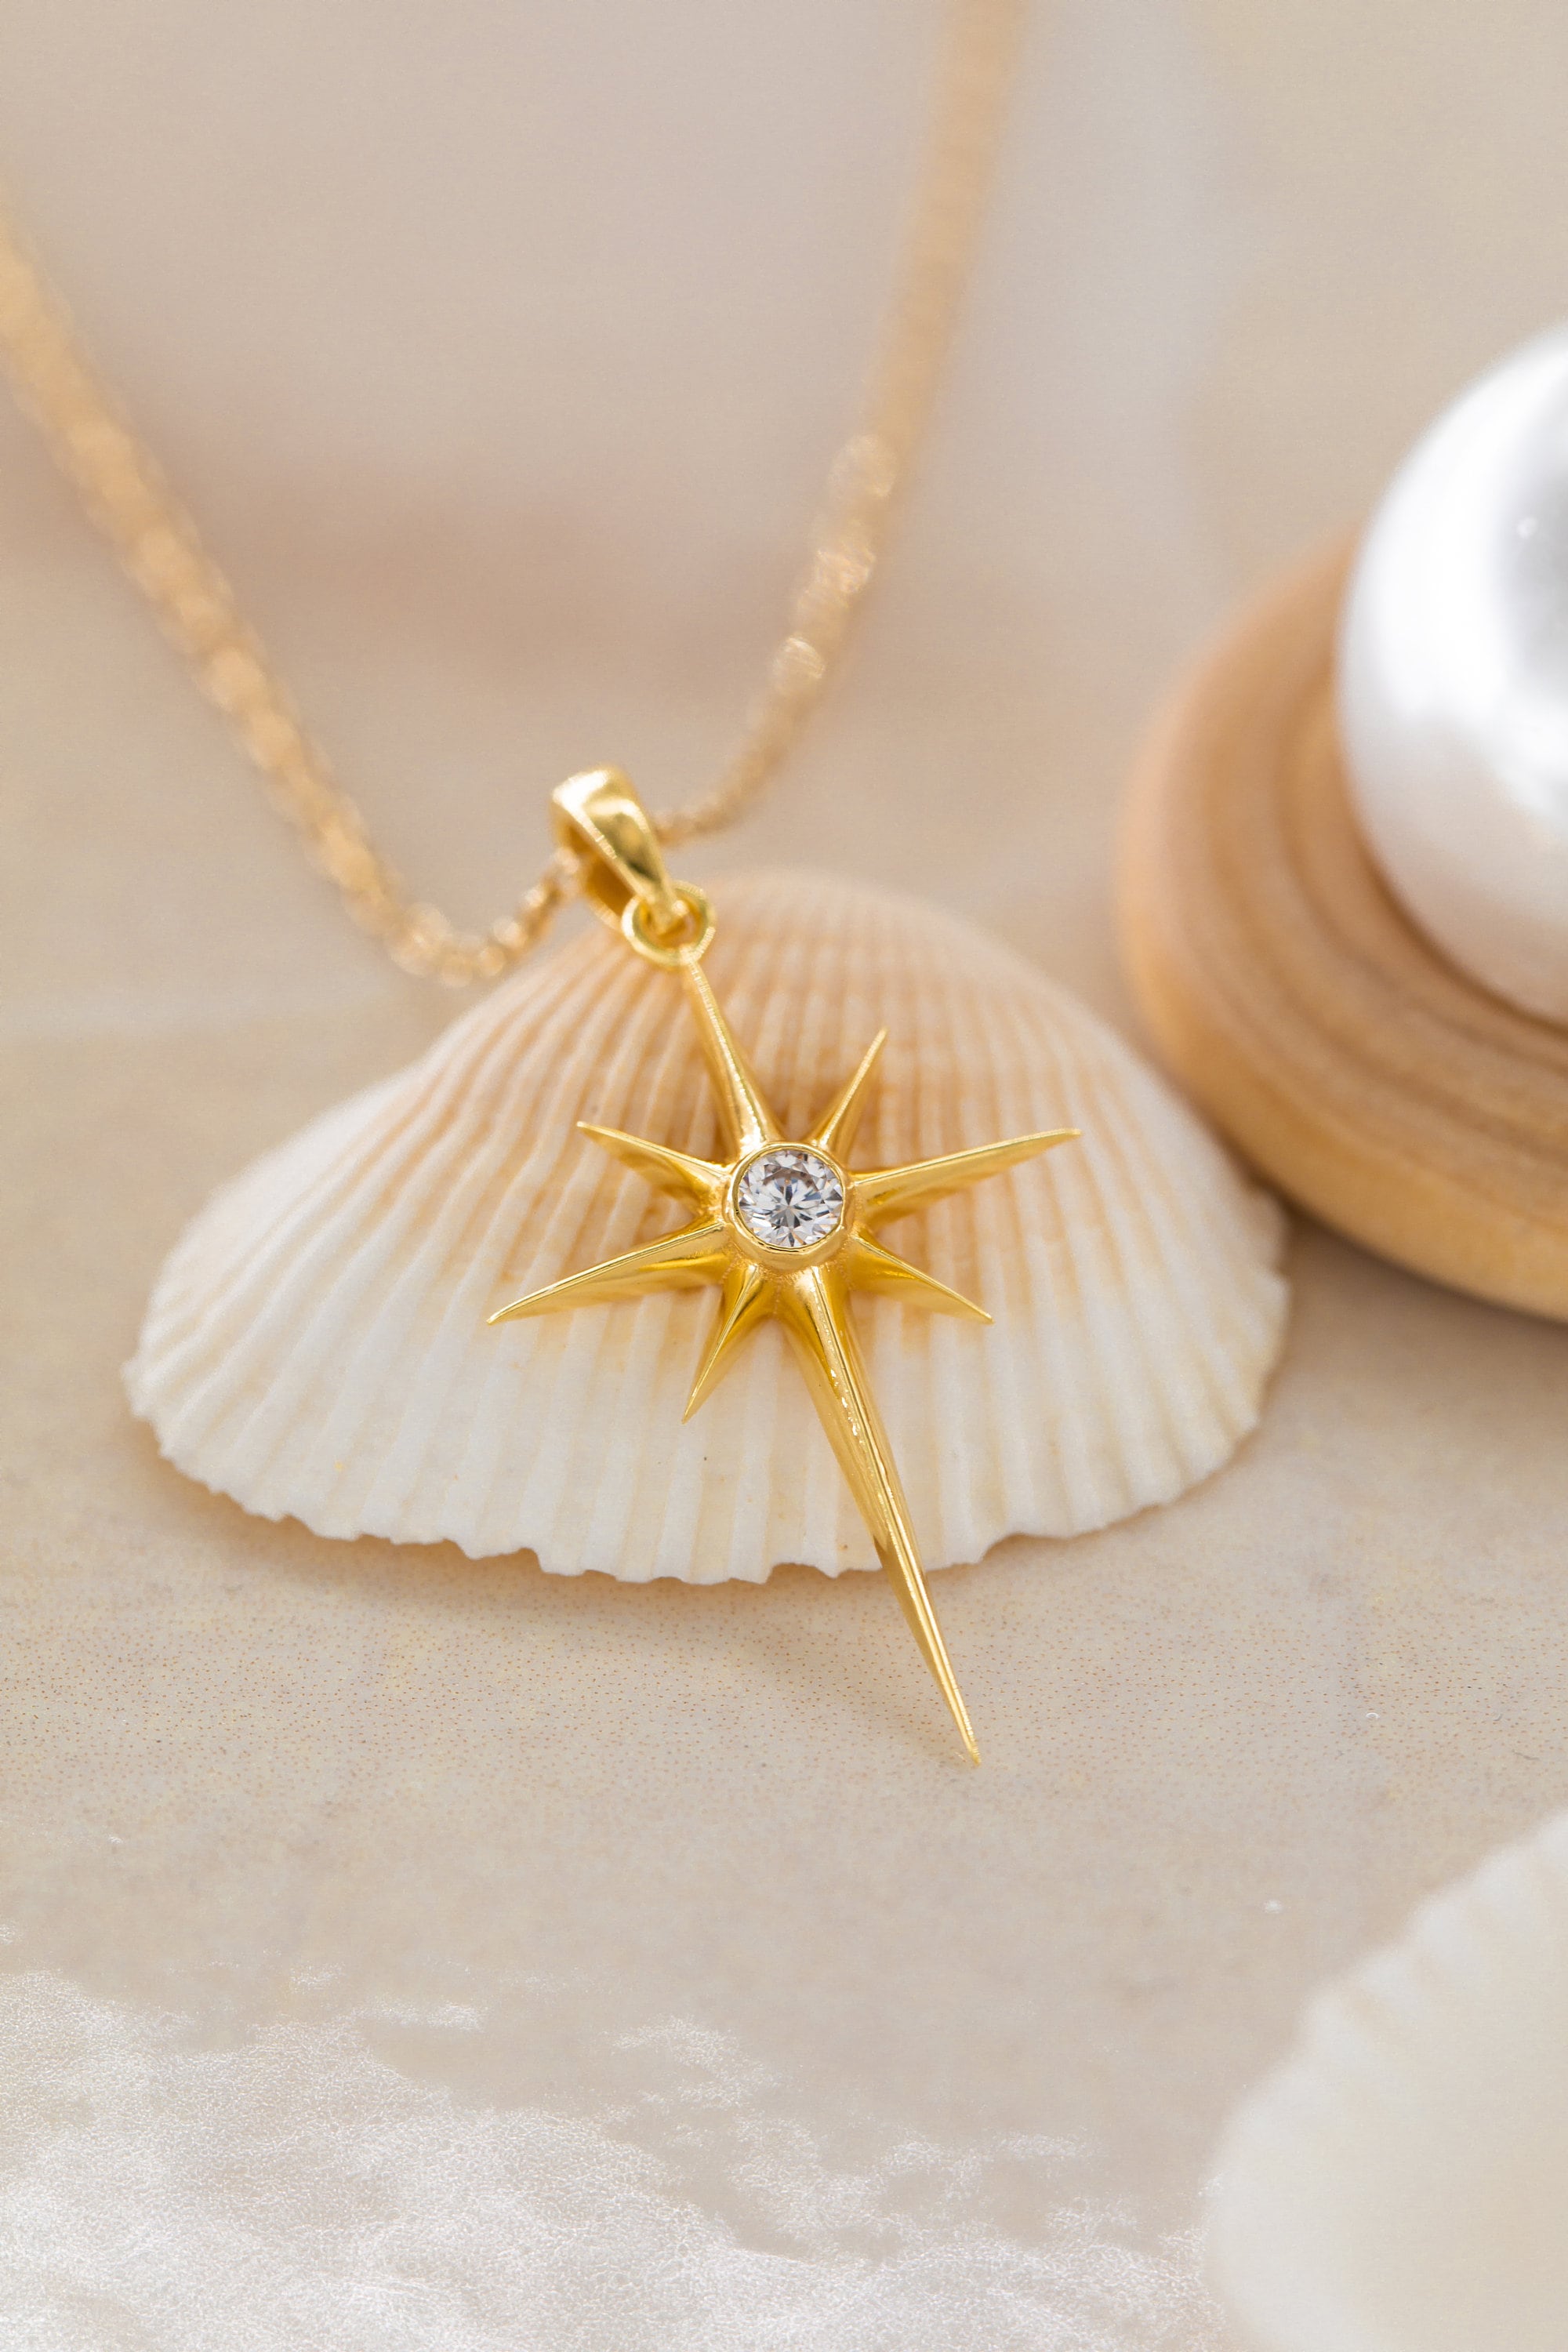 Astronomical Star Necklace, Sunburst Necklace, Sky Star Necklace, Celestial Necklace, Silver Space Traveler North Necklace, Gift for Women